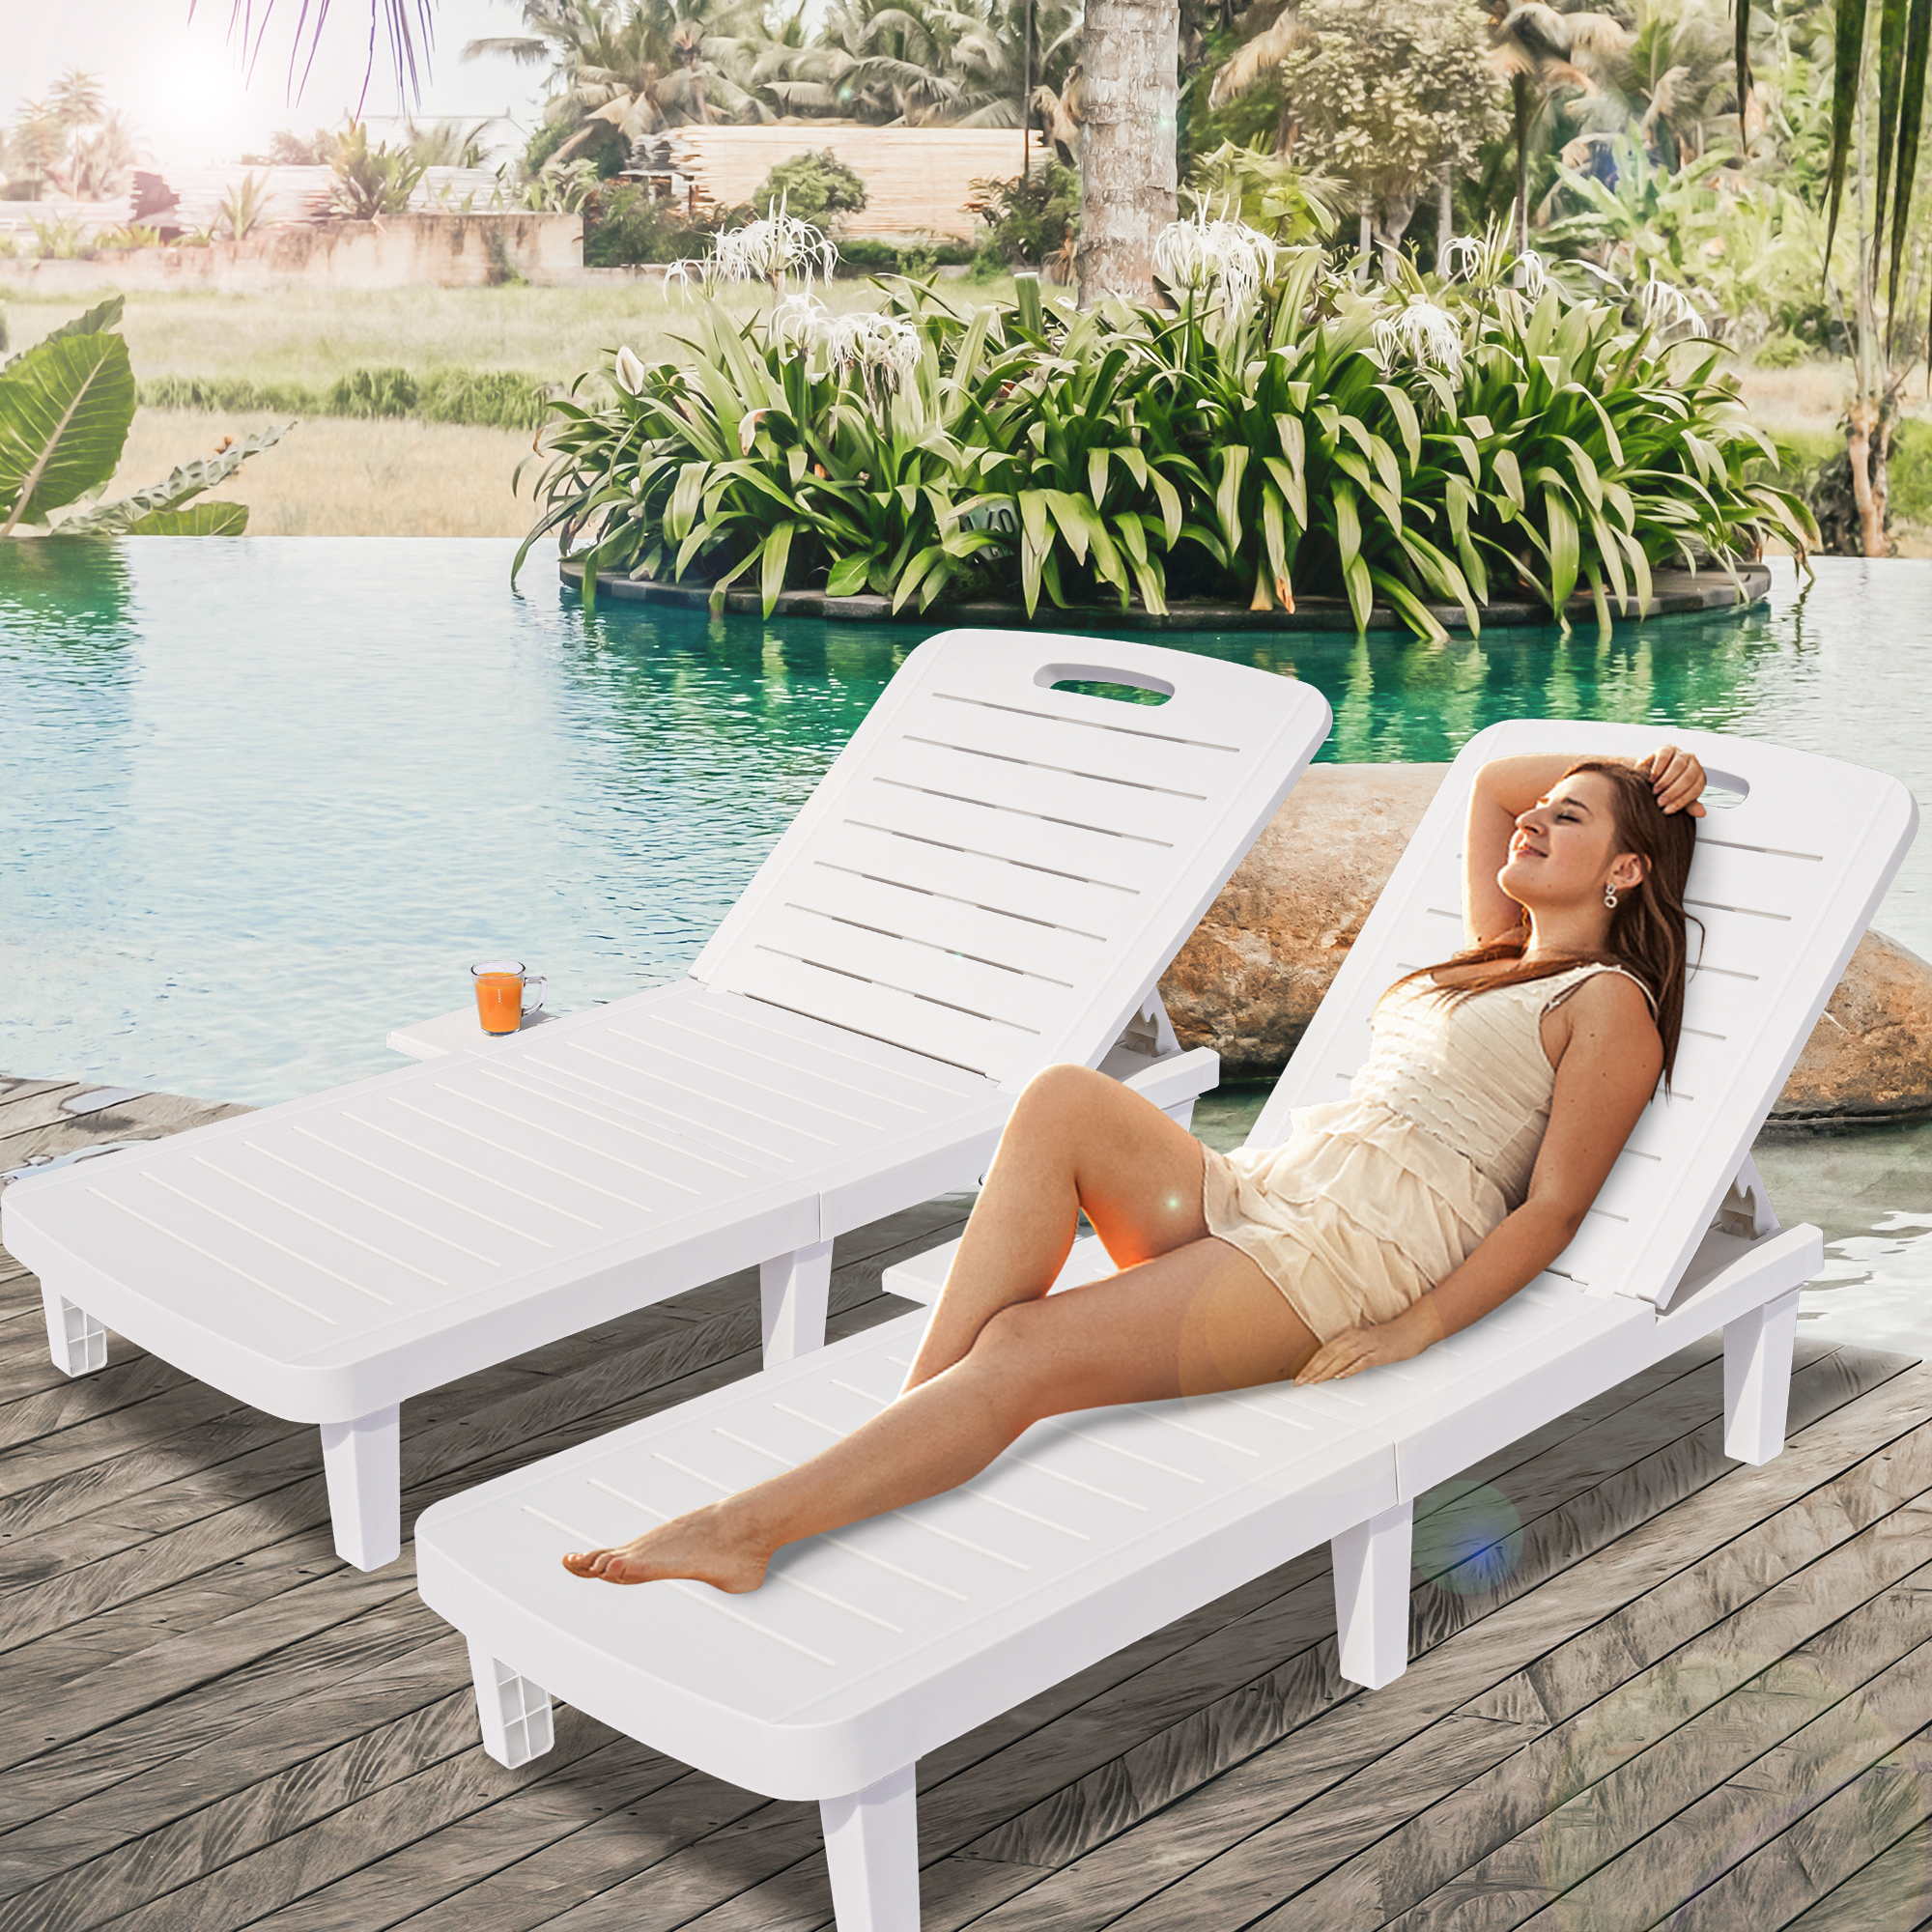 Segmart 2 Pieces Patio Chaise Lounge Furniture Set, Pool Reclining Chaise Chairs Set with Side Table, 5-Level Angles Adjust Backrest Outdoor Lounge, White, SS2122 - image 1 of 10